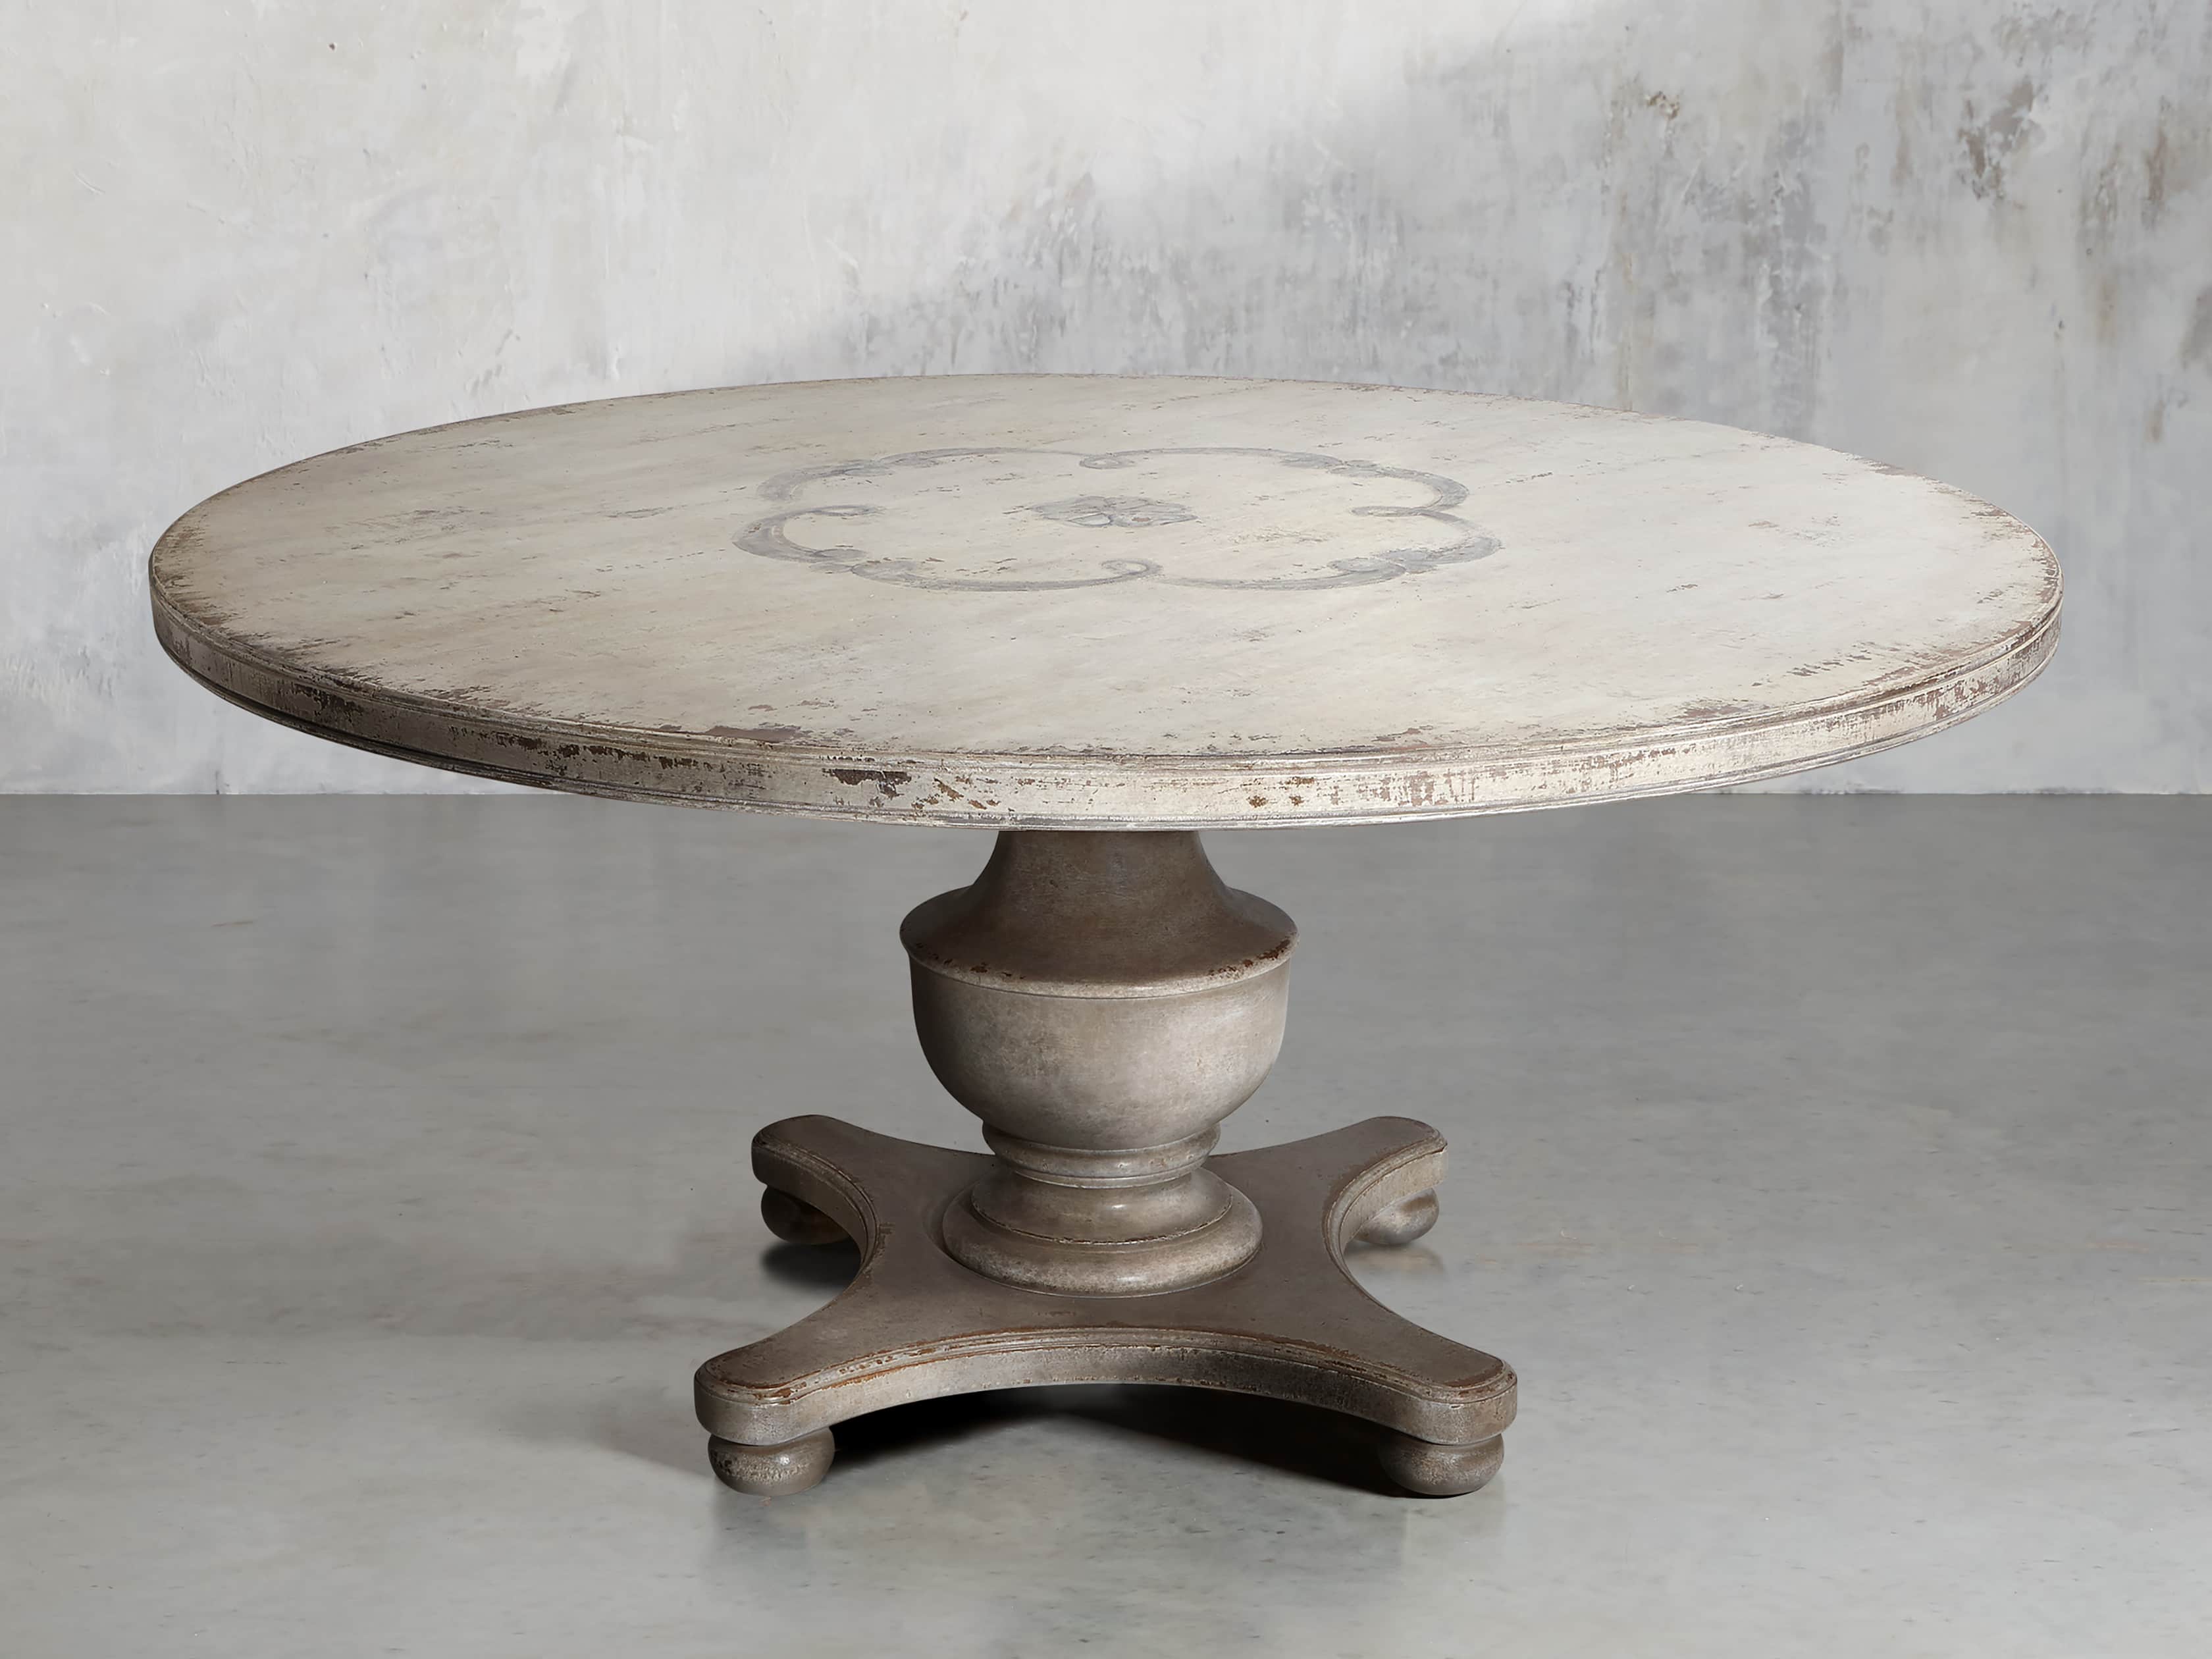 Biancca Bell Arte Round Dining Table, Old Round Table